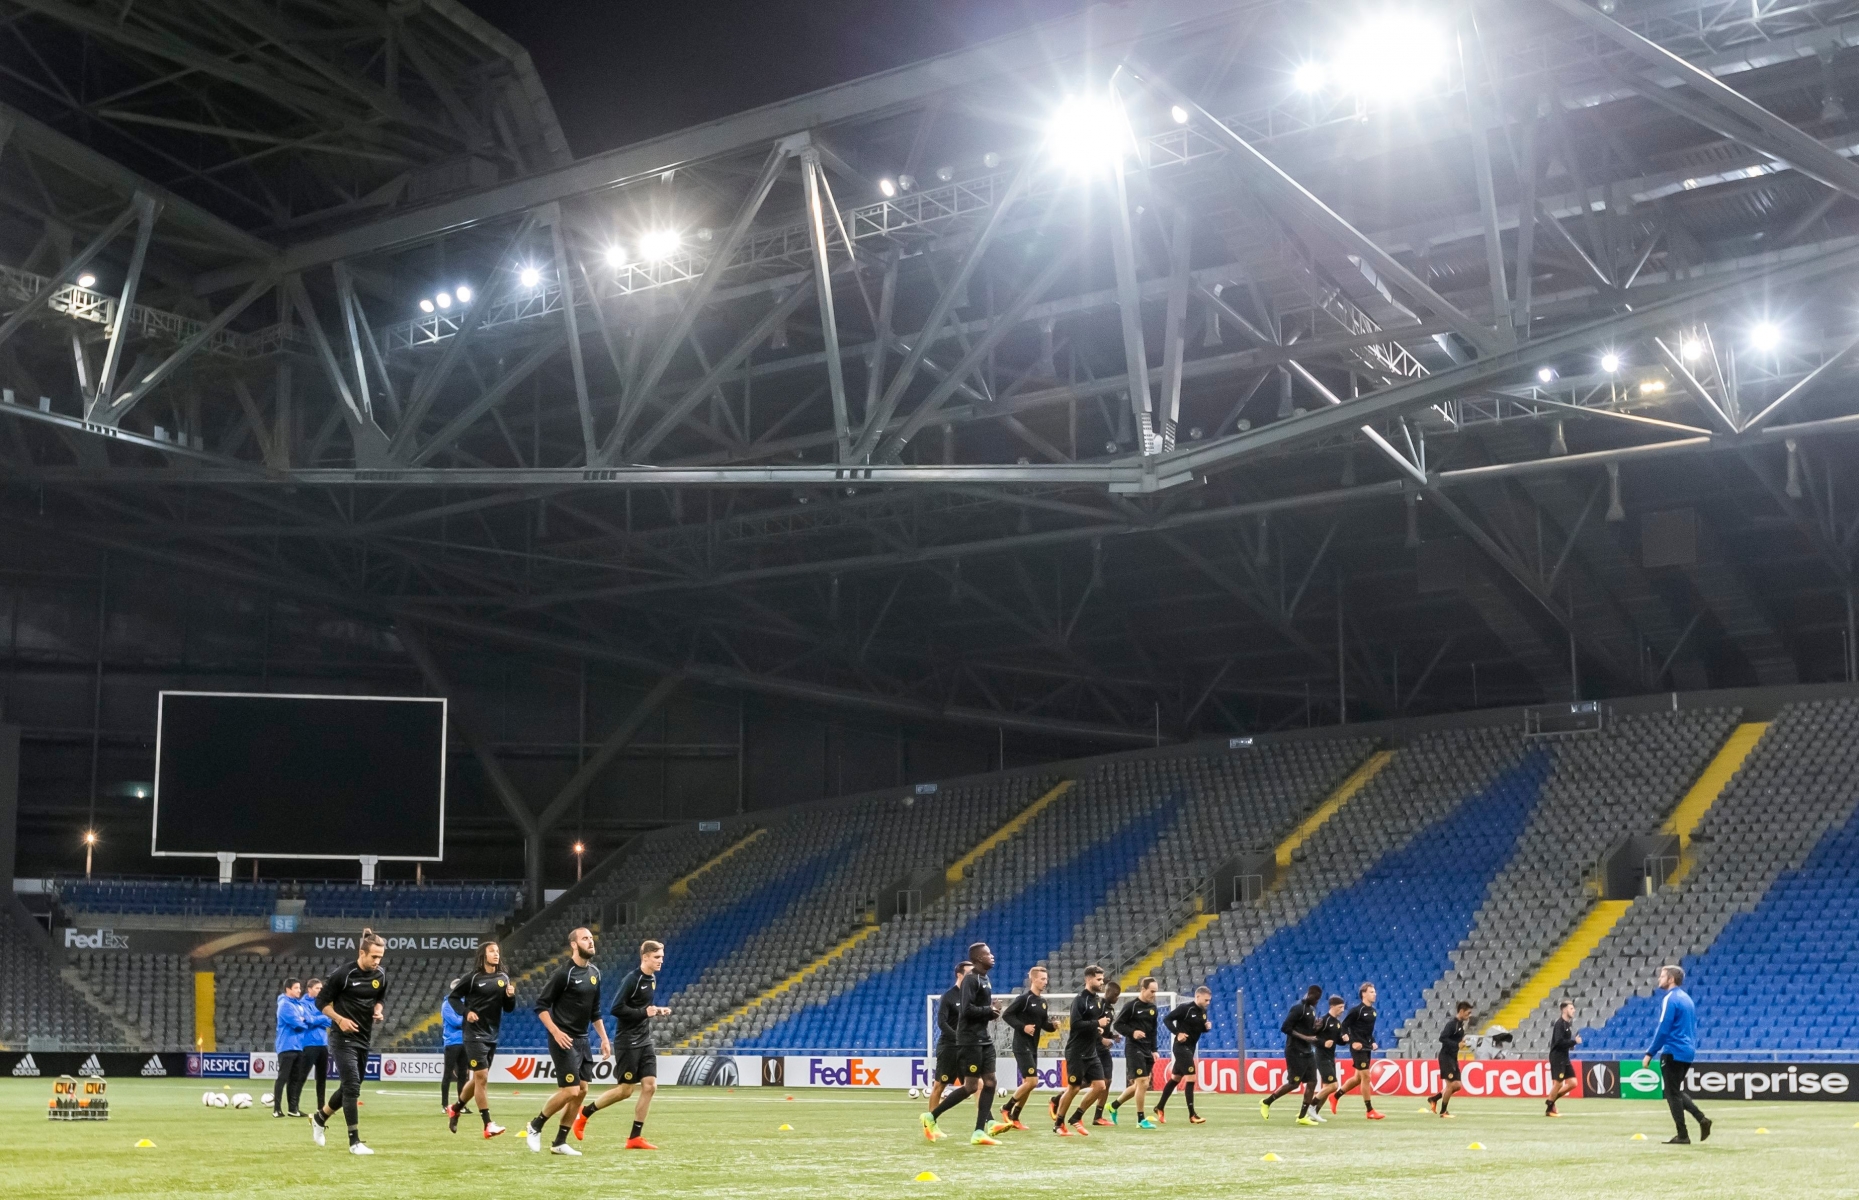 BSC Young Boys' players during a training session one day prior the UEFA Europa League group A match between Kazakhstan's FC Astana and Switzerland's BSC Young Boys at the Astana Arena in Astana, Kazakhstan, Wednesday, September 28, 2016. (KEYSTONE/Thomas Hodel) FUSSBALL EUROPA LEAGUE ASTANA BSC YOUNG BOYS